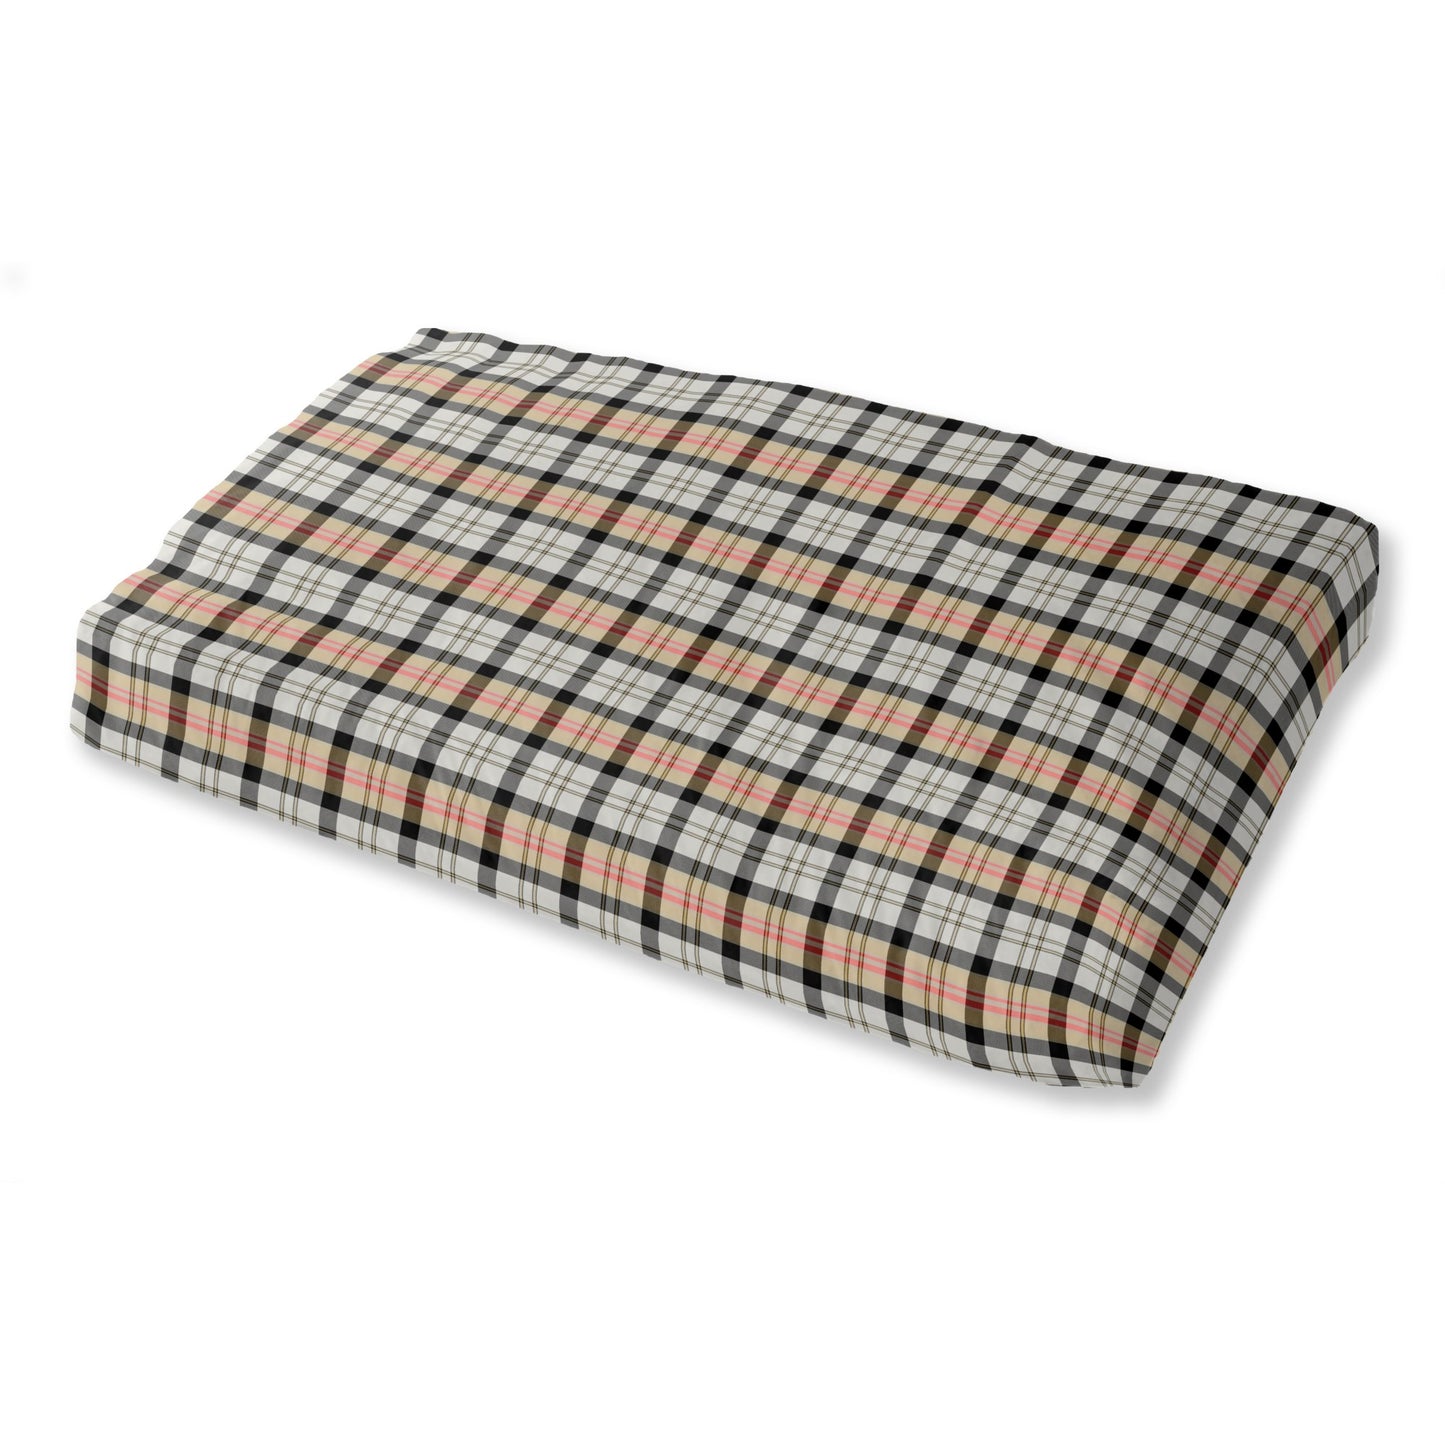 Silver and Gold Plaid Pet Bed- shades and stripes of yellow, gold, cream, red, and black